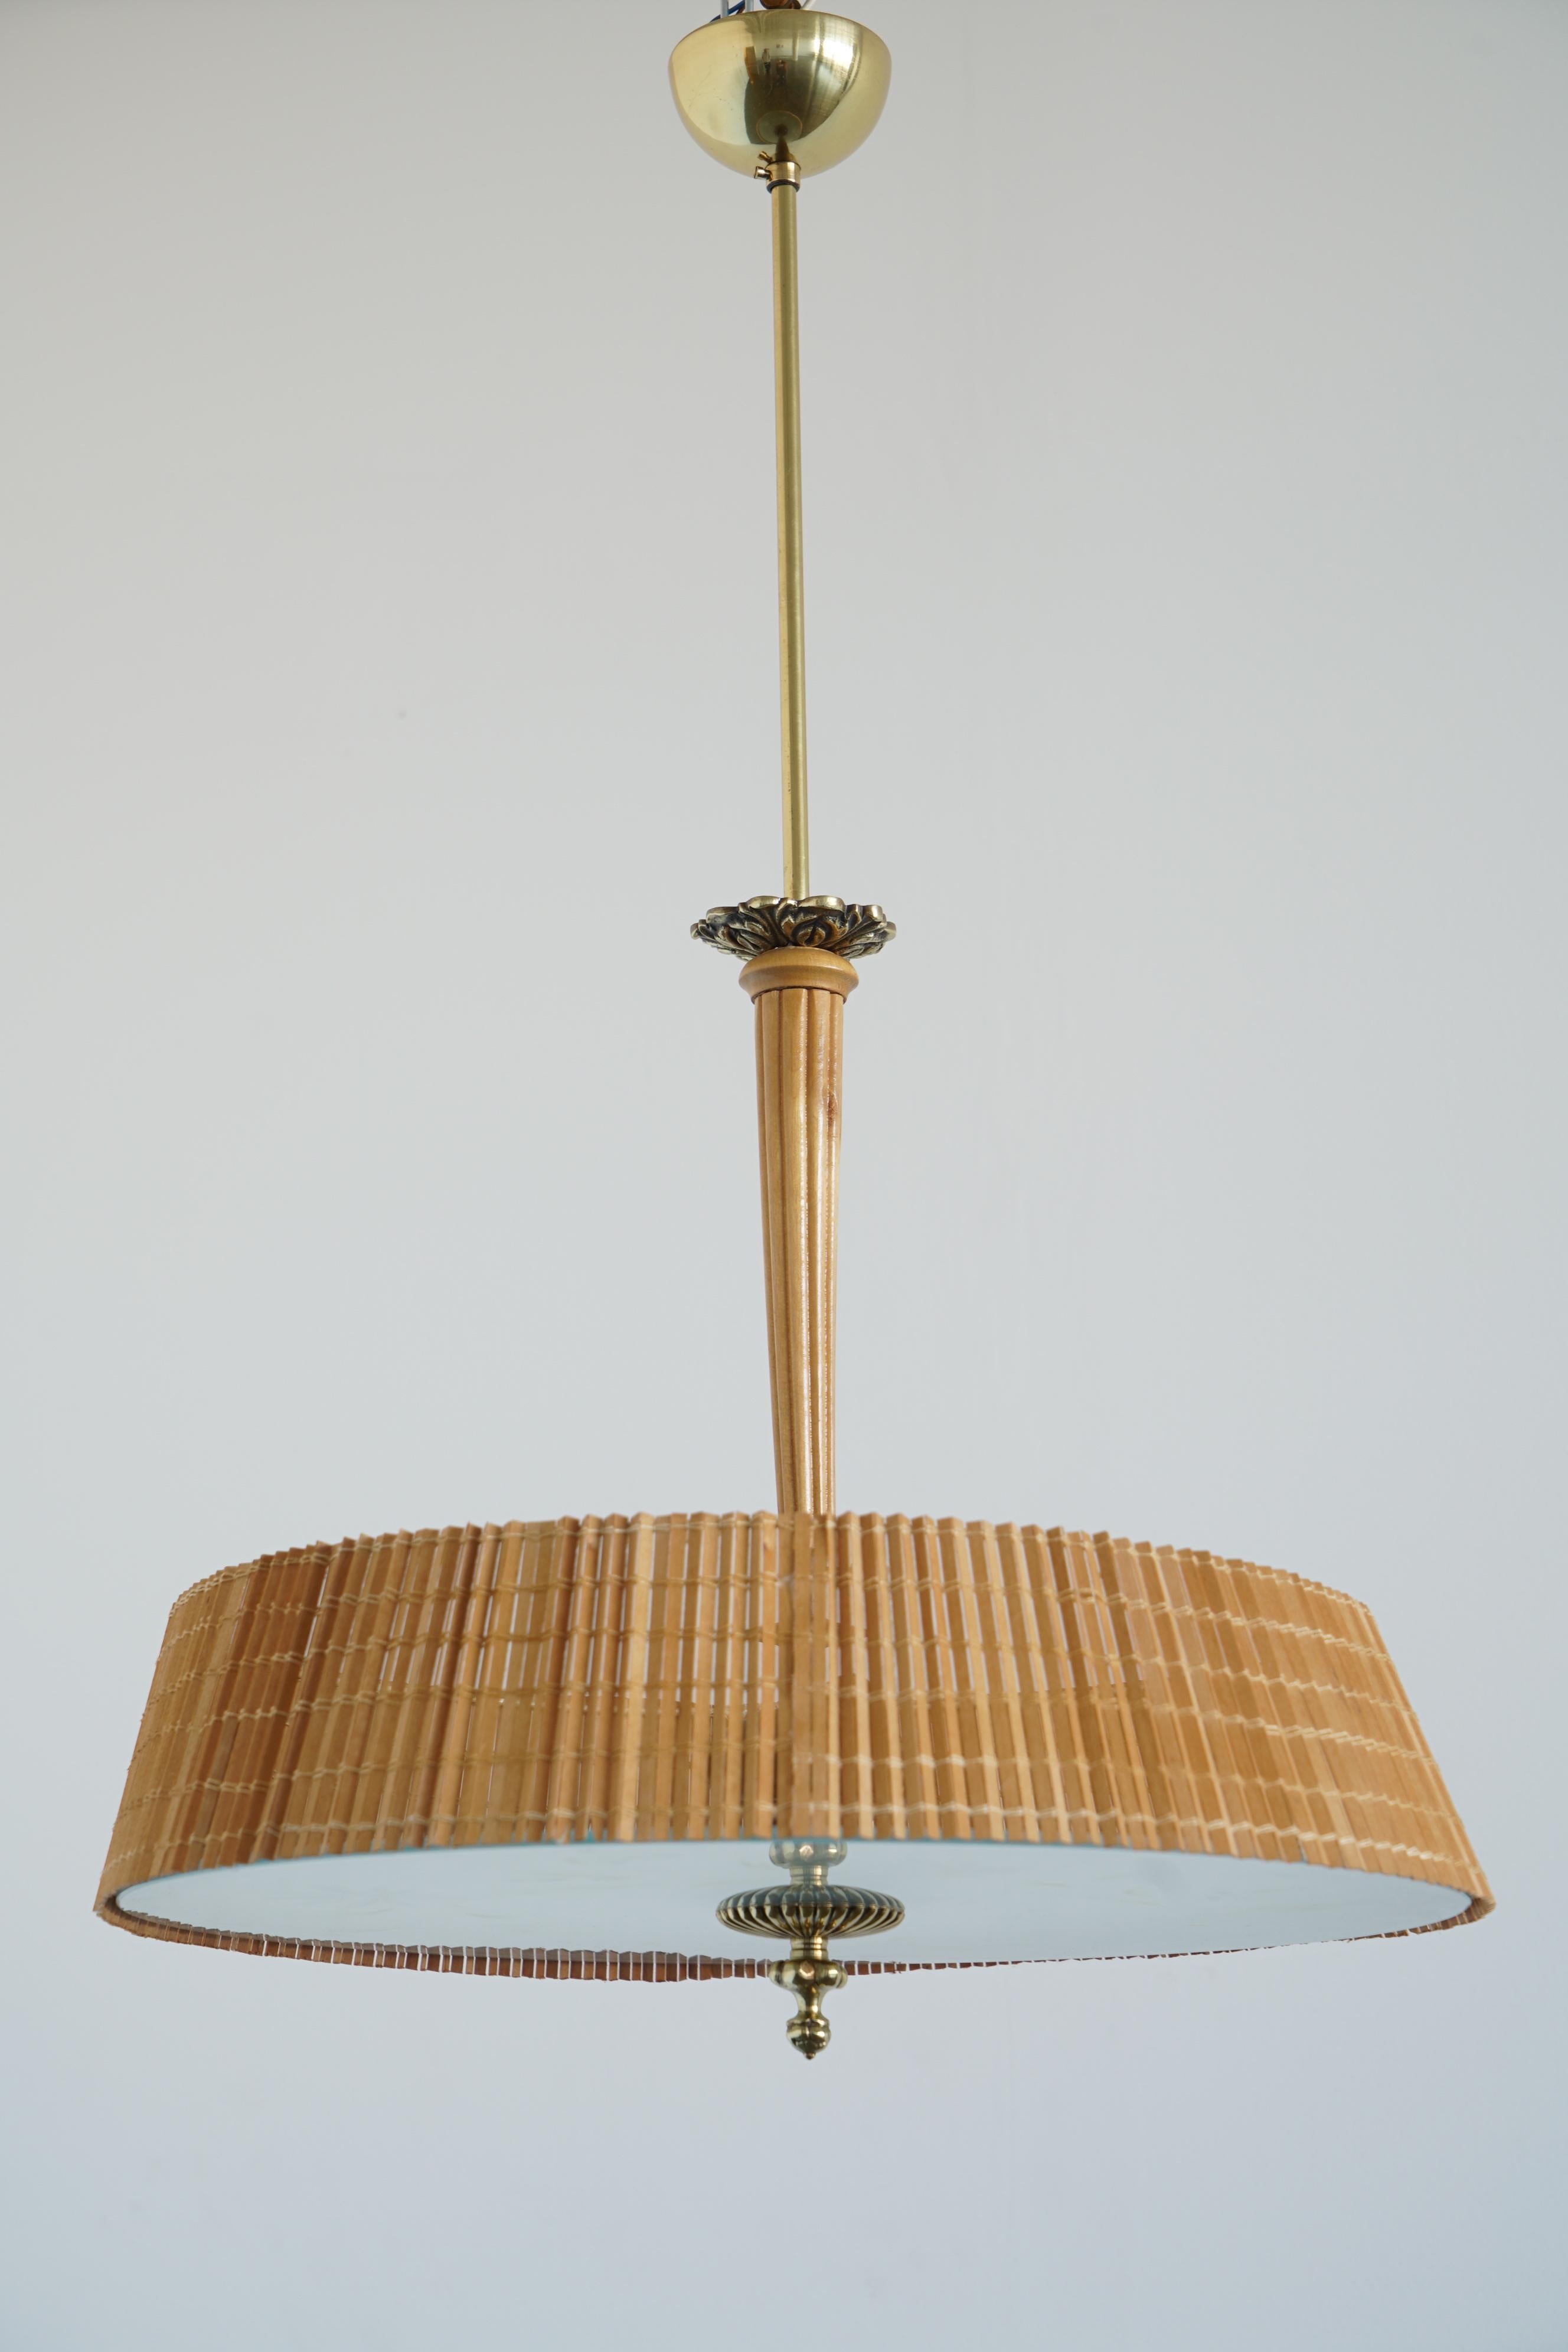 Paavo Tynell's ceiling light with hand painted glass diffuser by Kyllikki Salmenhaara, manufactured by Taito Oy,Finland. Circa 1940-50´s.
 2 Edison sockets. Two fixtures available with different paint pattern. Rewiring available upon request.